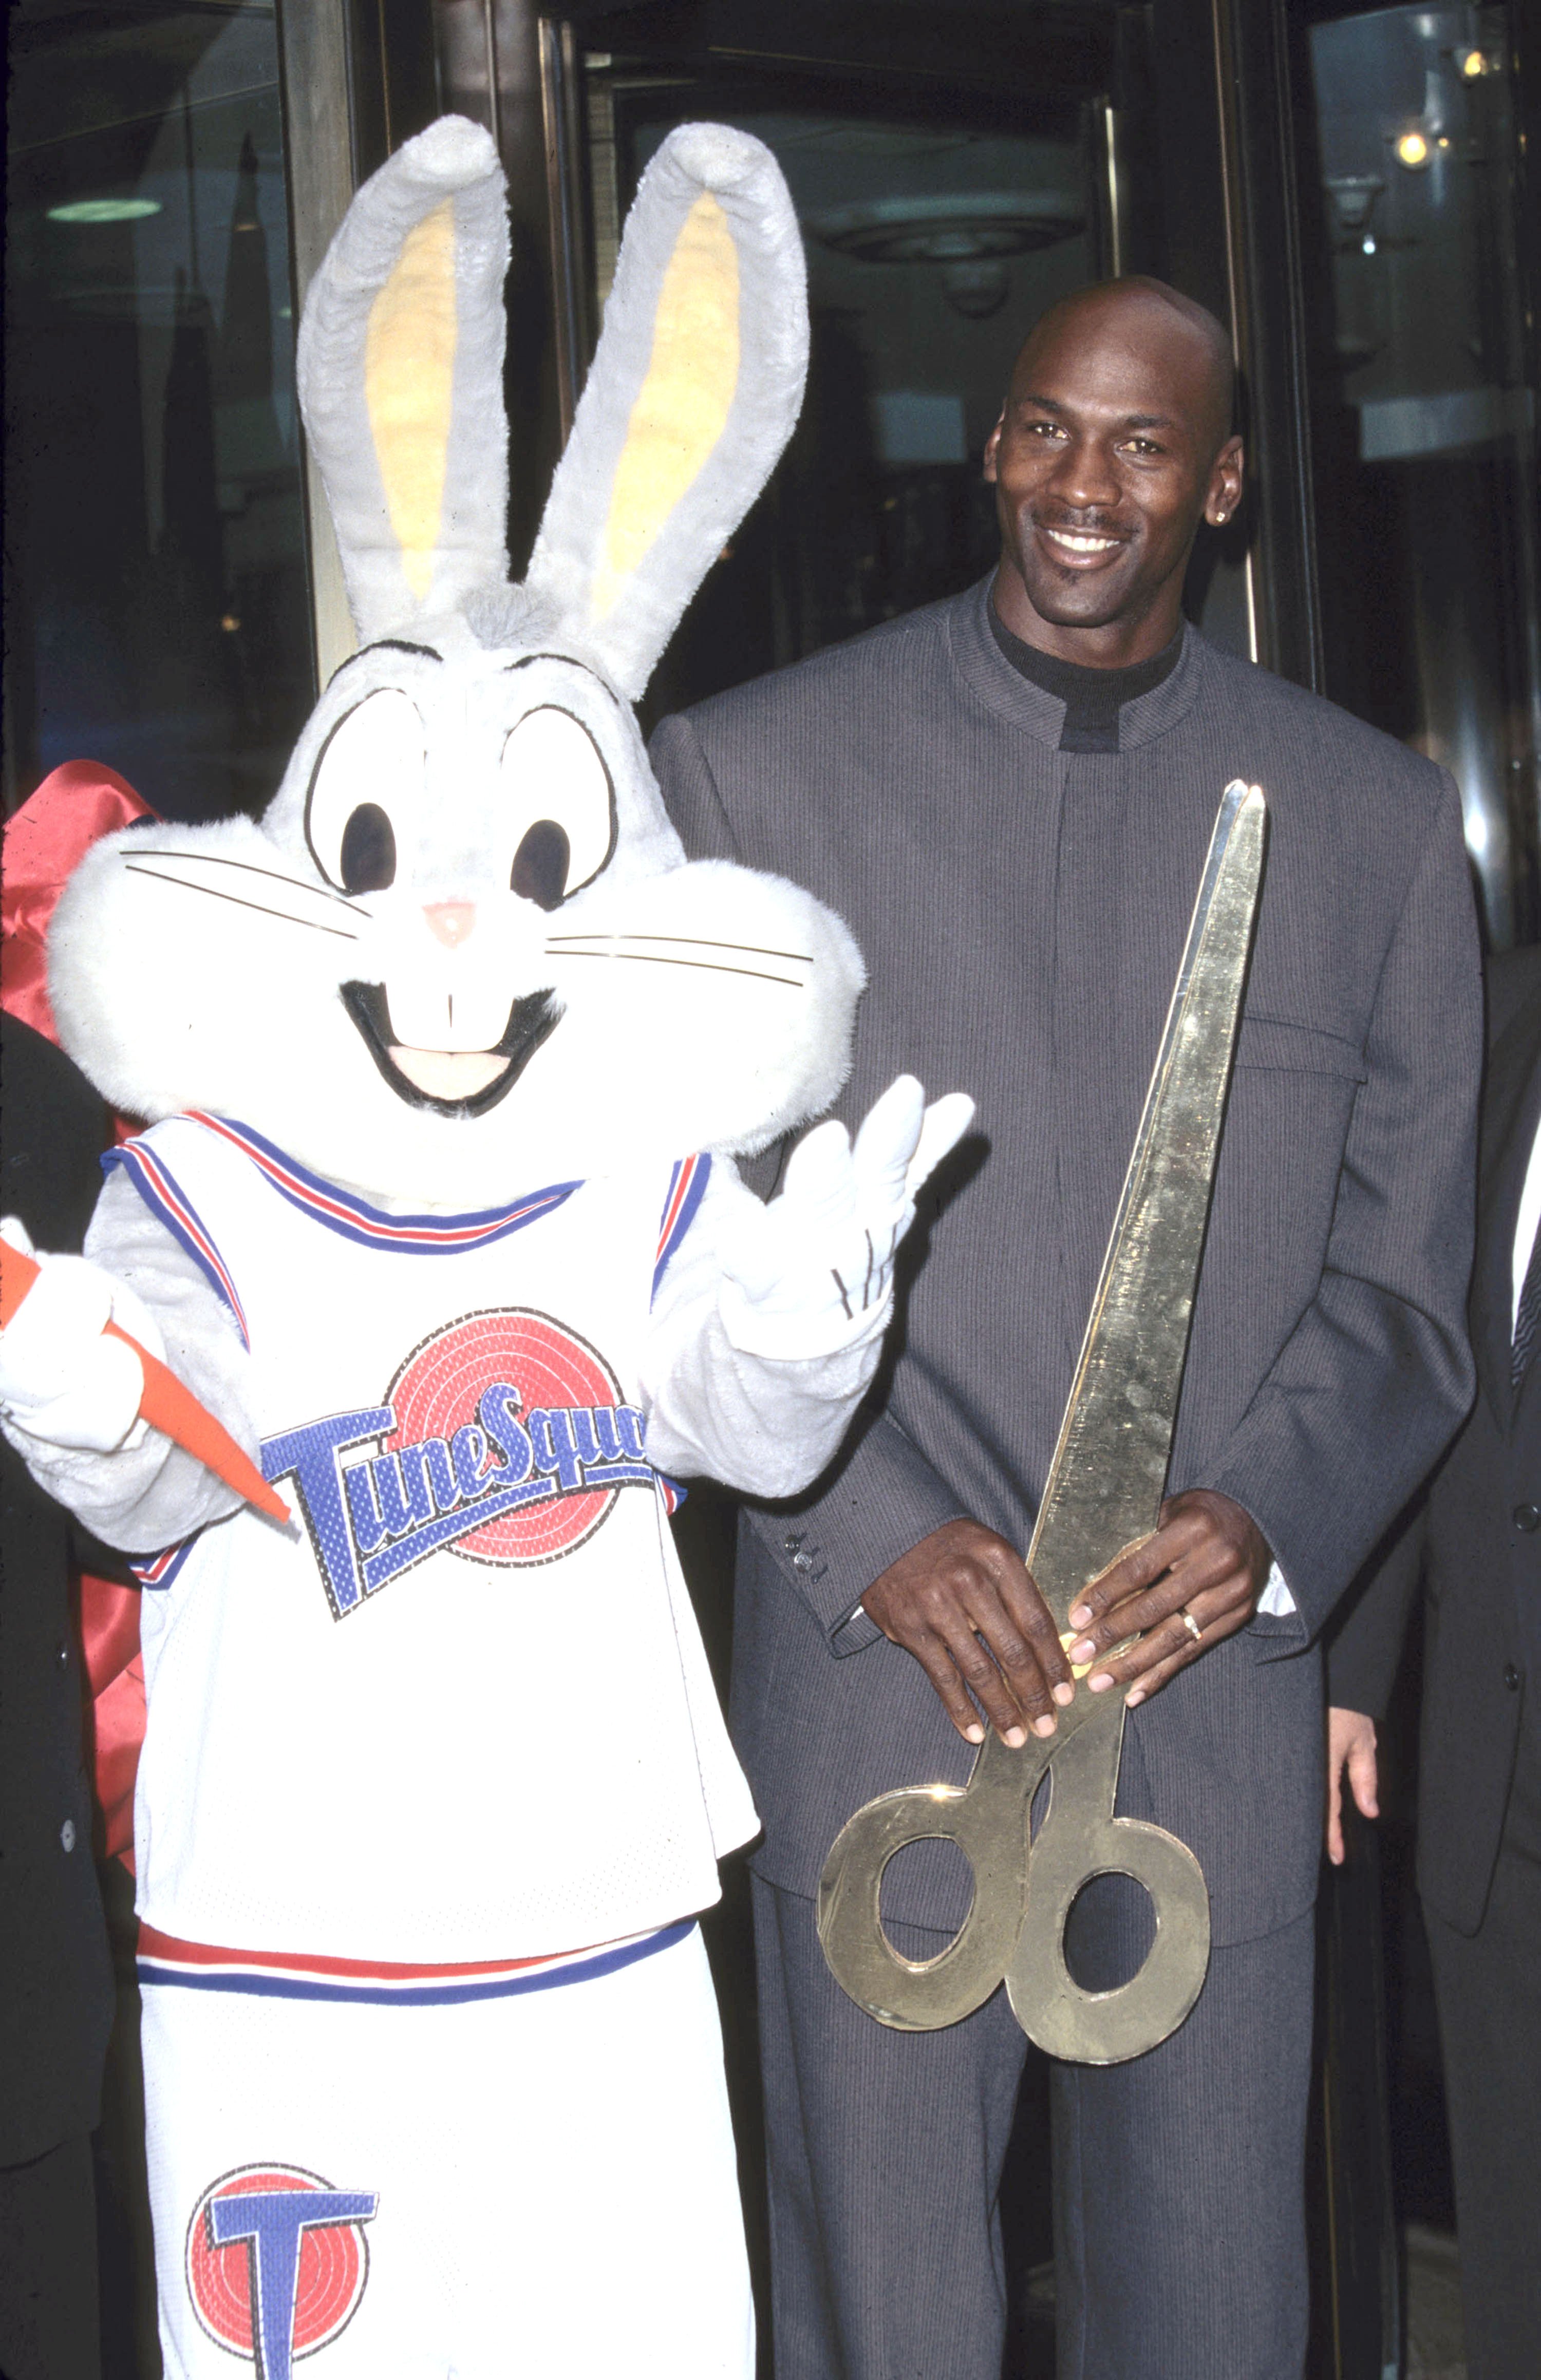 Bugs Bunny and Michael Jordan pose for photo at Warner Bros. Ribbon cutting ceremony for NYC store opening in 1996